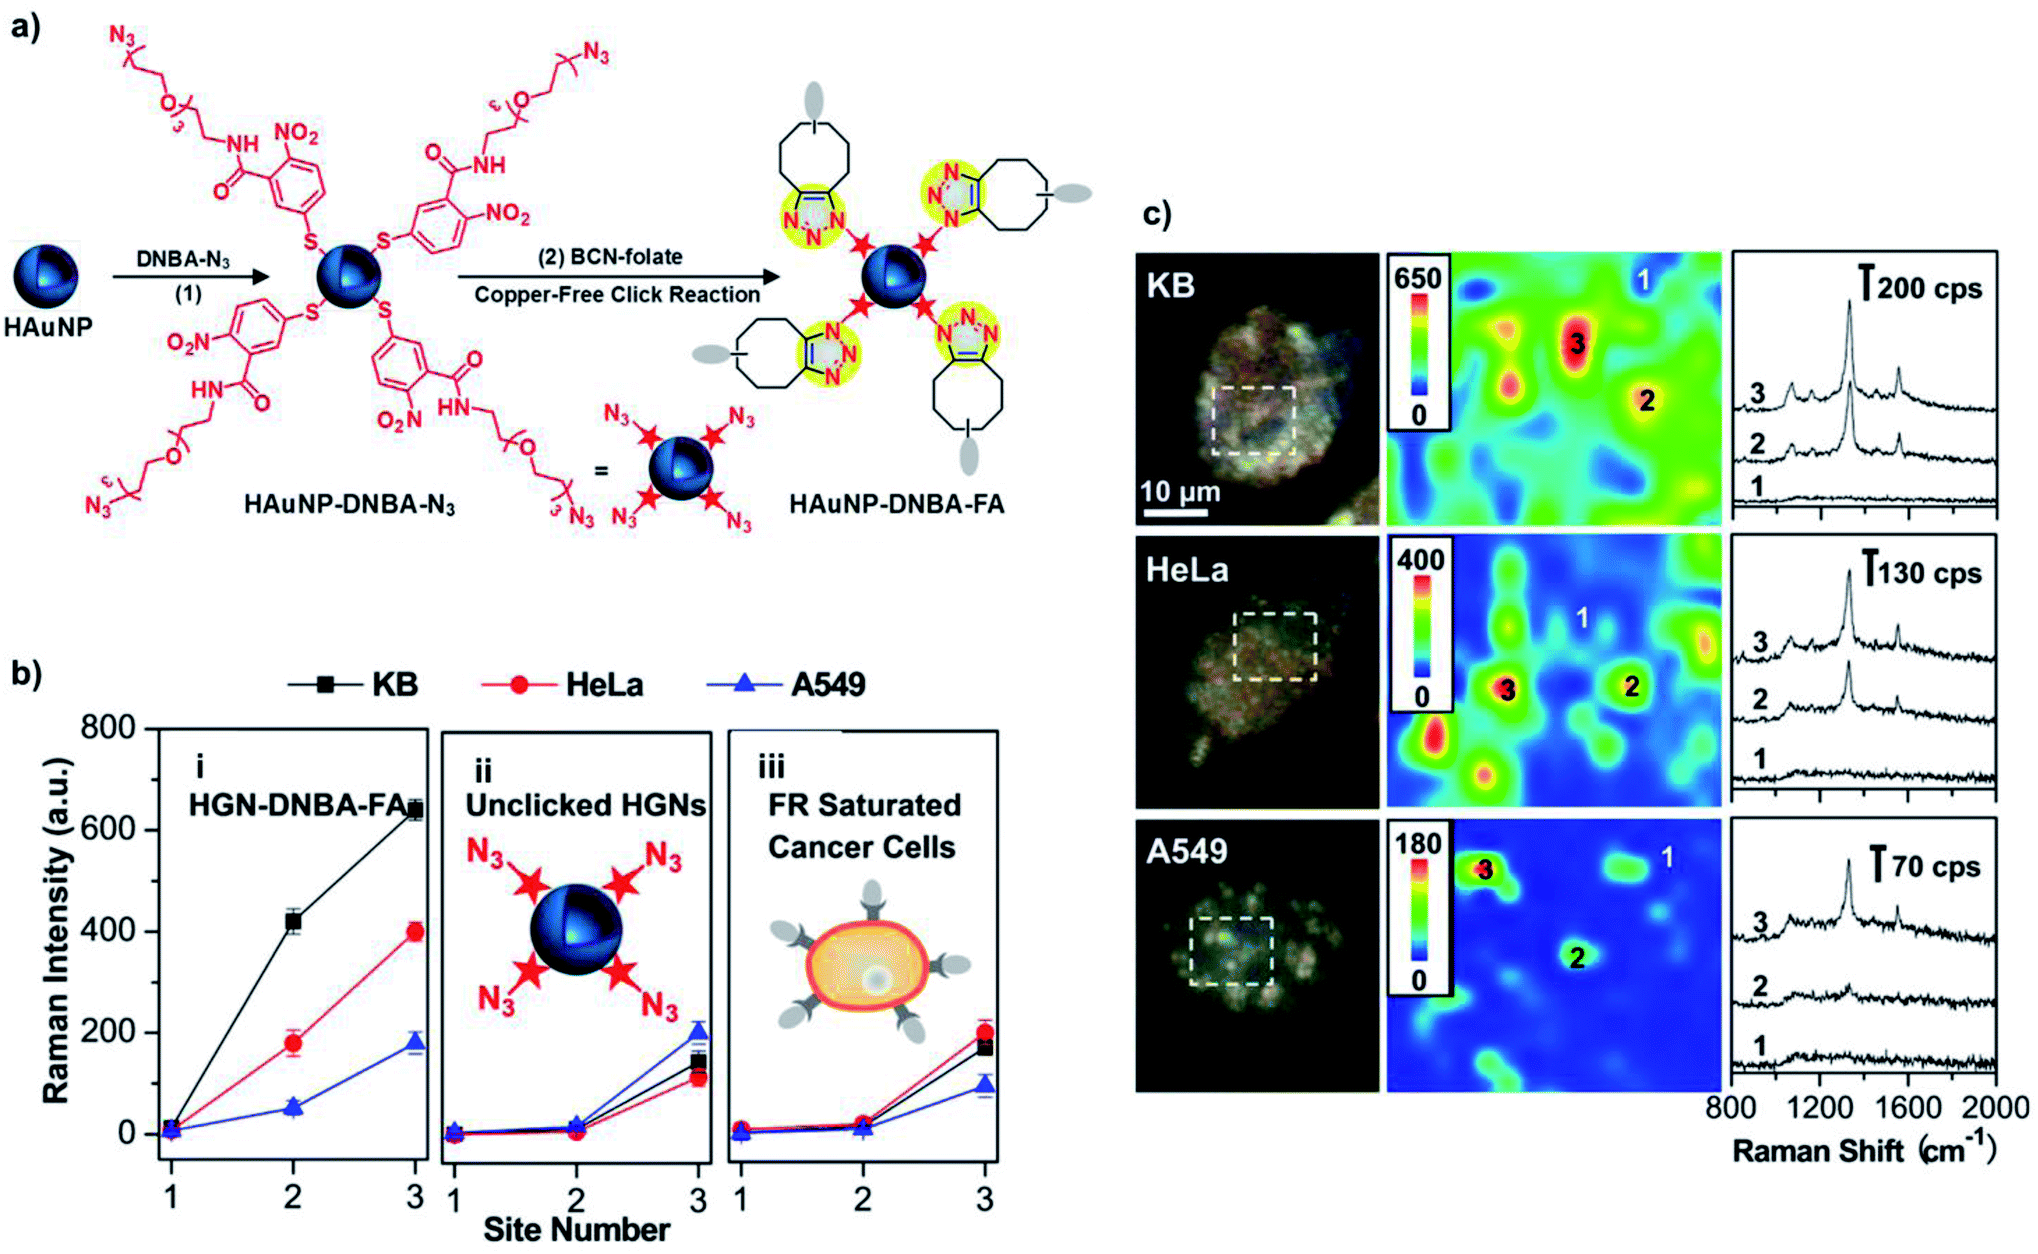 Nanoparticles and bioorthogonal chemistry joining forces for improved  biomedical applications - Nanoscale Advances (RSC Publishing)  DOI:10.1039/D0NA00873G